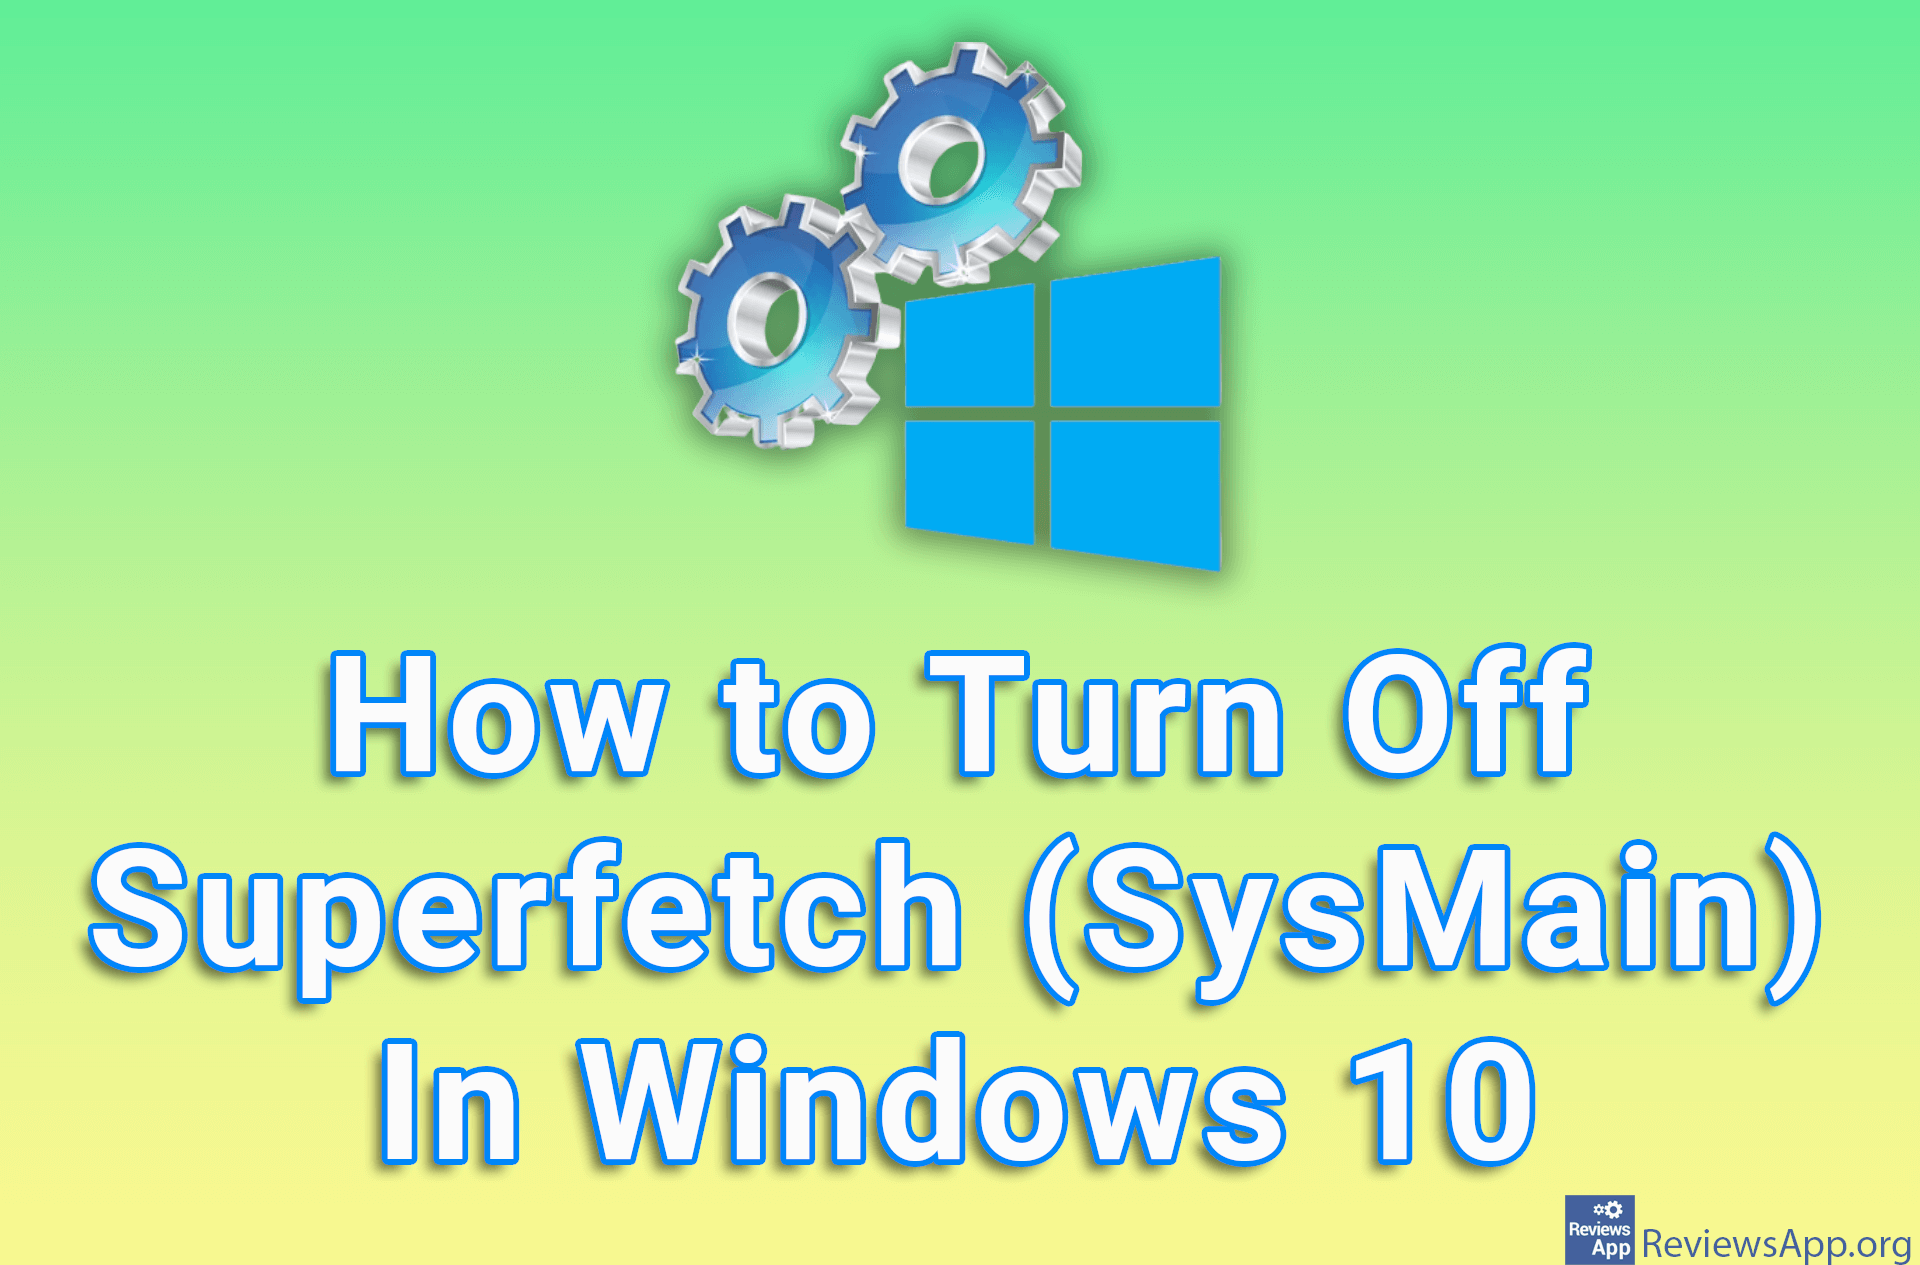 How to Turn Off Superfetch (SysMain) In Windows 10